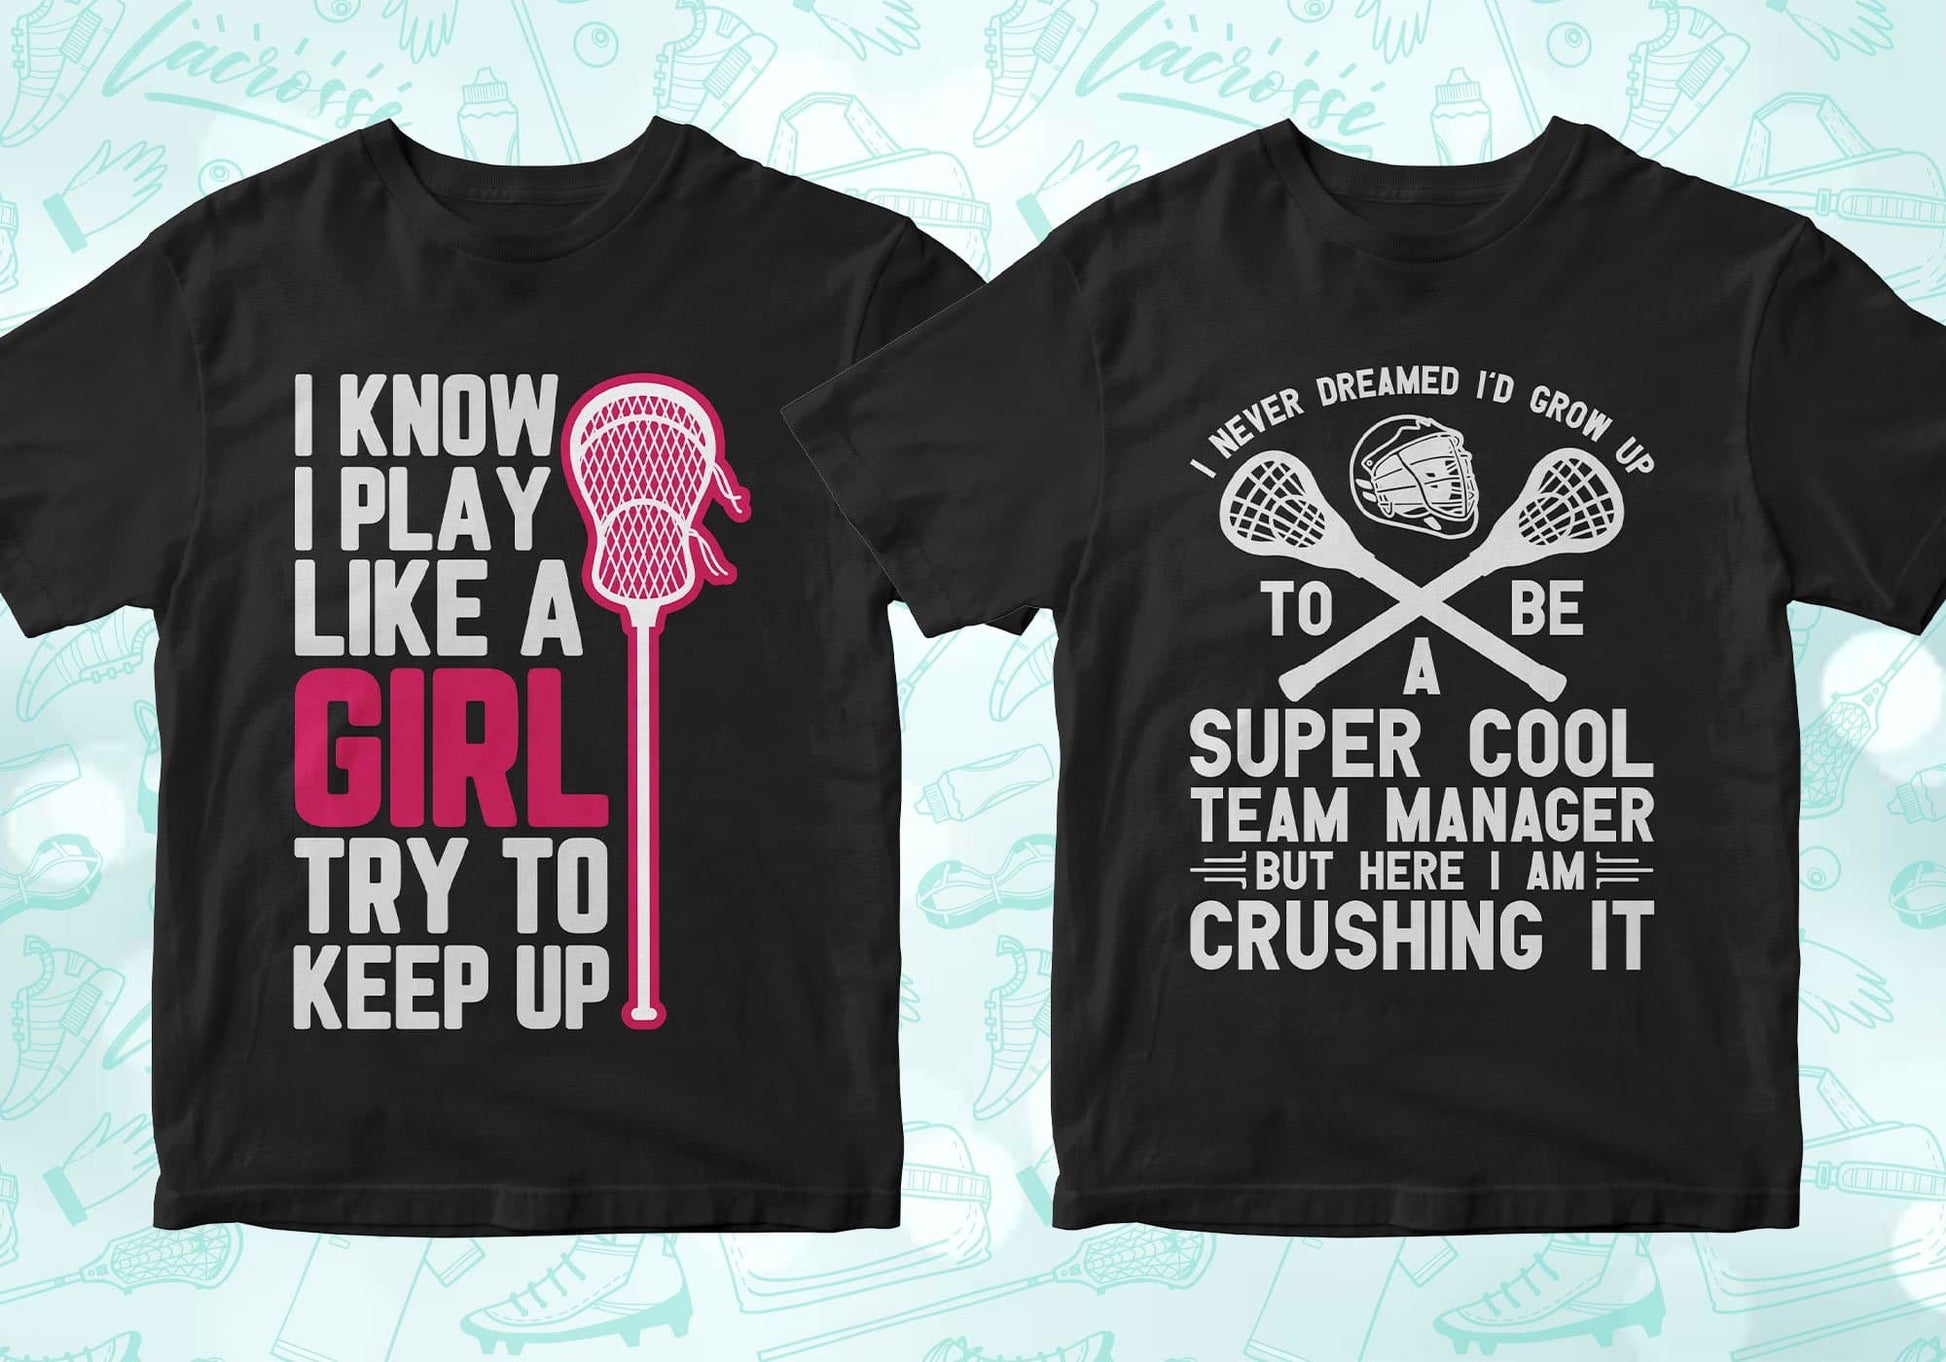 I know I play like a girl try to keep up, I never dreamed i'd grow up to be a super cool team manager but here I am crushing it, lacrosse shirts lacrosse tshirt lacrosse t shirts lacrosse shirt designs lacrosse graphic